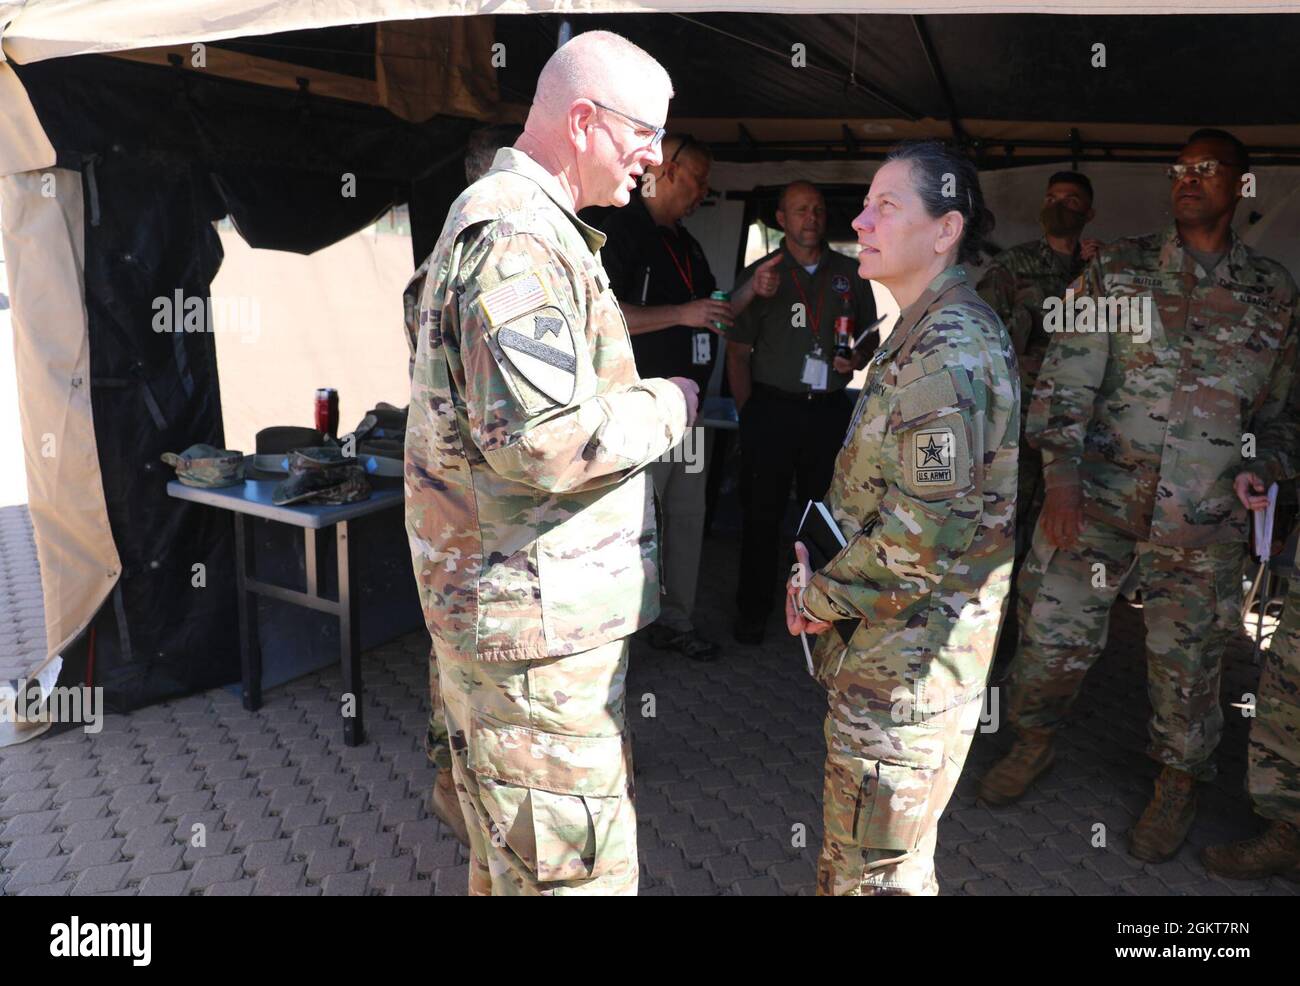 Brig. Gen. Gen. Jeffrey C. Coggin (left), commanding general of the U.S. Army Civil Affairs and Psychological Operations Command (Airborne), speaks with Lt. Gen. Jody J. Daniels (right), chief of Army Reserve and commanding general, U.S. Army Reserve Command, as they participate in the Joint Warfighting Assessment 2021 distinguished visitor day initial briefing at Fort Carson, Colo., June 25, 2021. U.S. Army Civil Affairs and Psychological Operations Command (Airborne) Civil Affairs, Psychological Operations, and Information Operations Soldiers took part in JWA 2021 with participants from diff Stock Photo